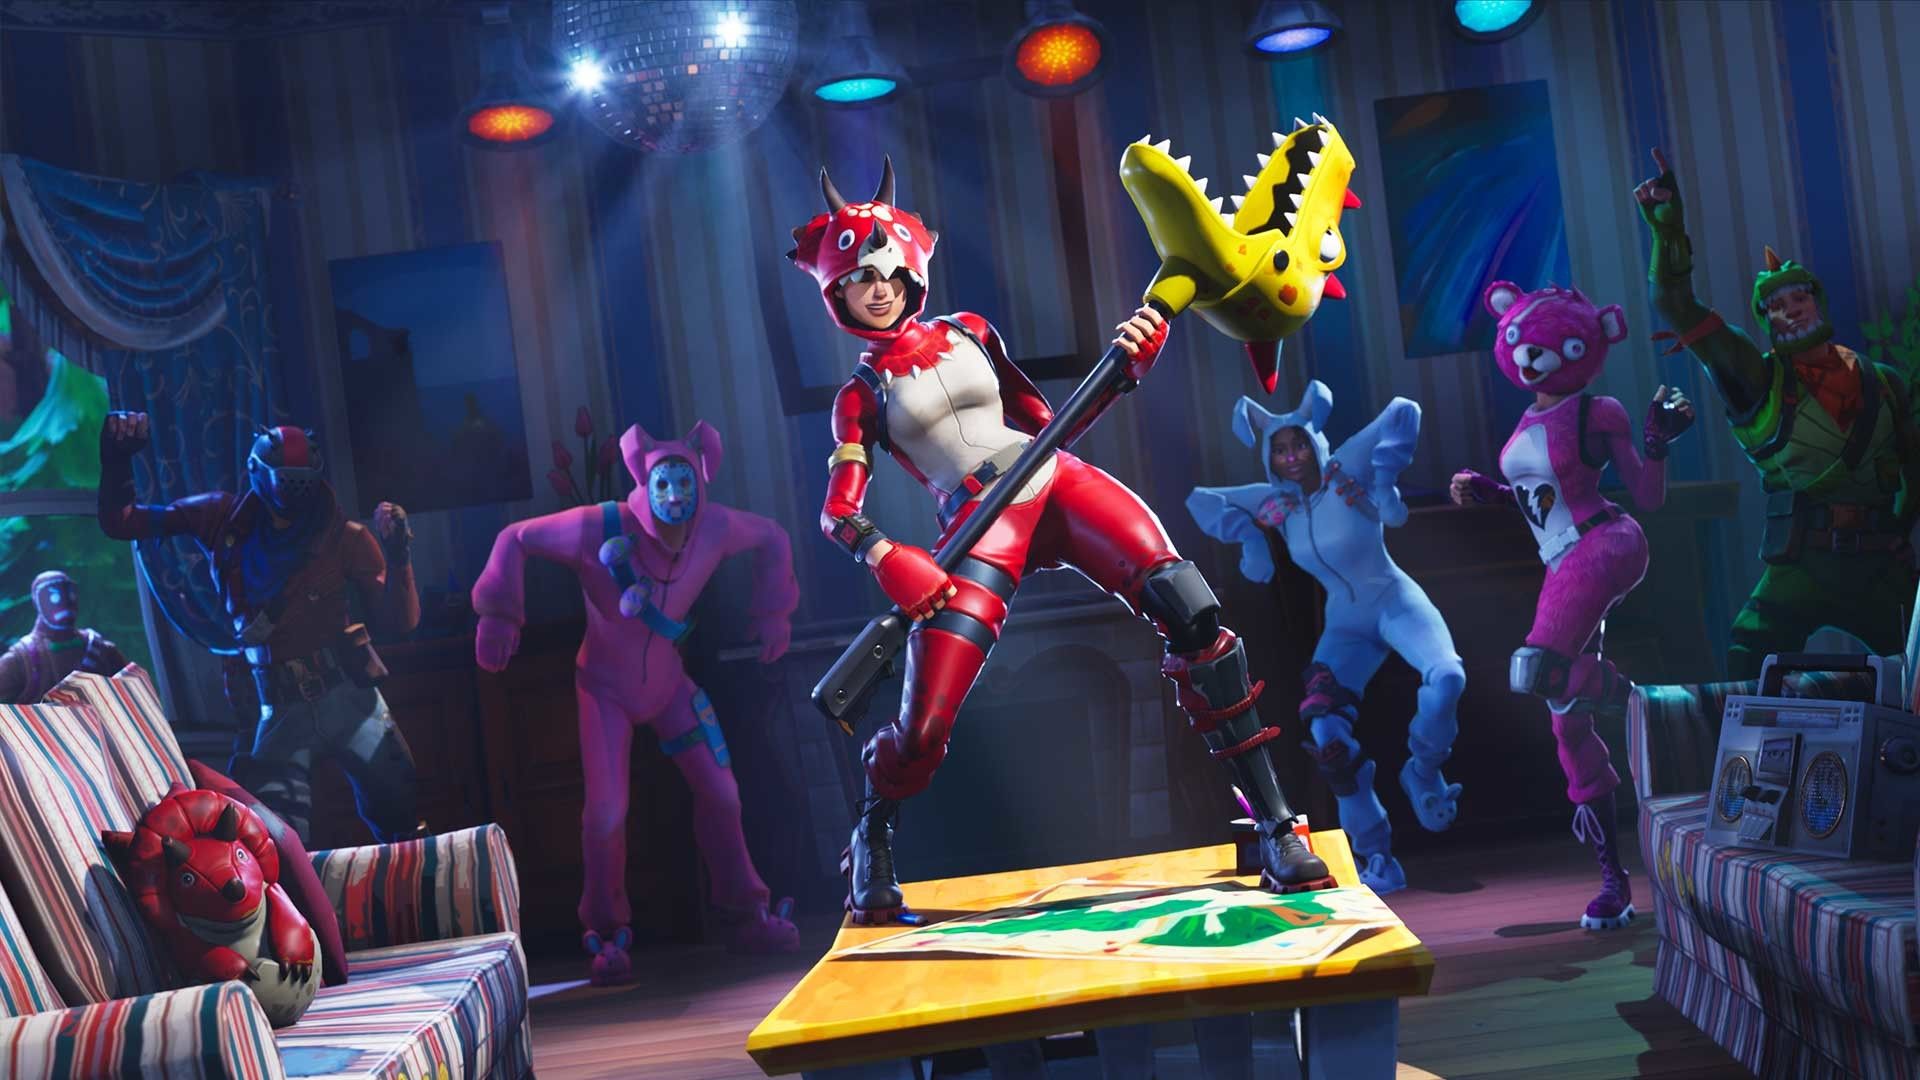 "No one can own a dance step": Epic Games Weigh In on Fortnite Dance Lawsuits